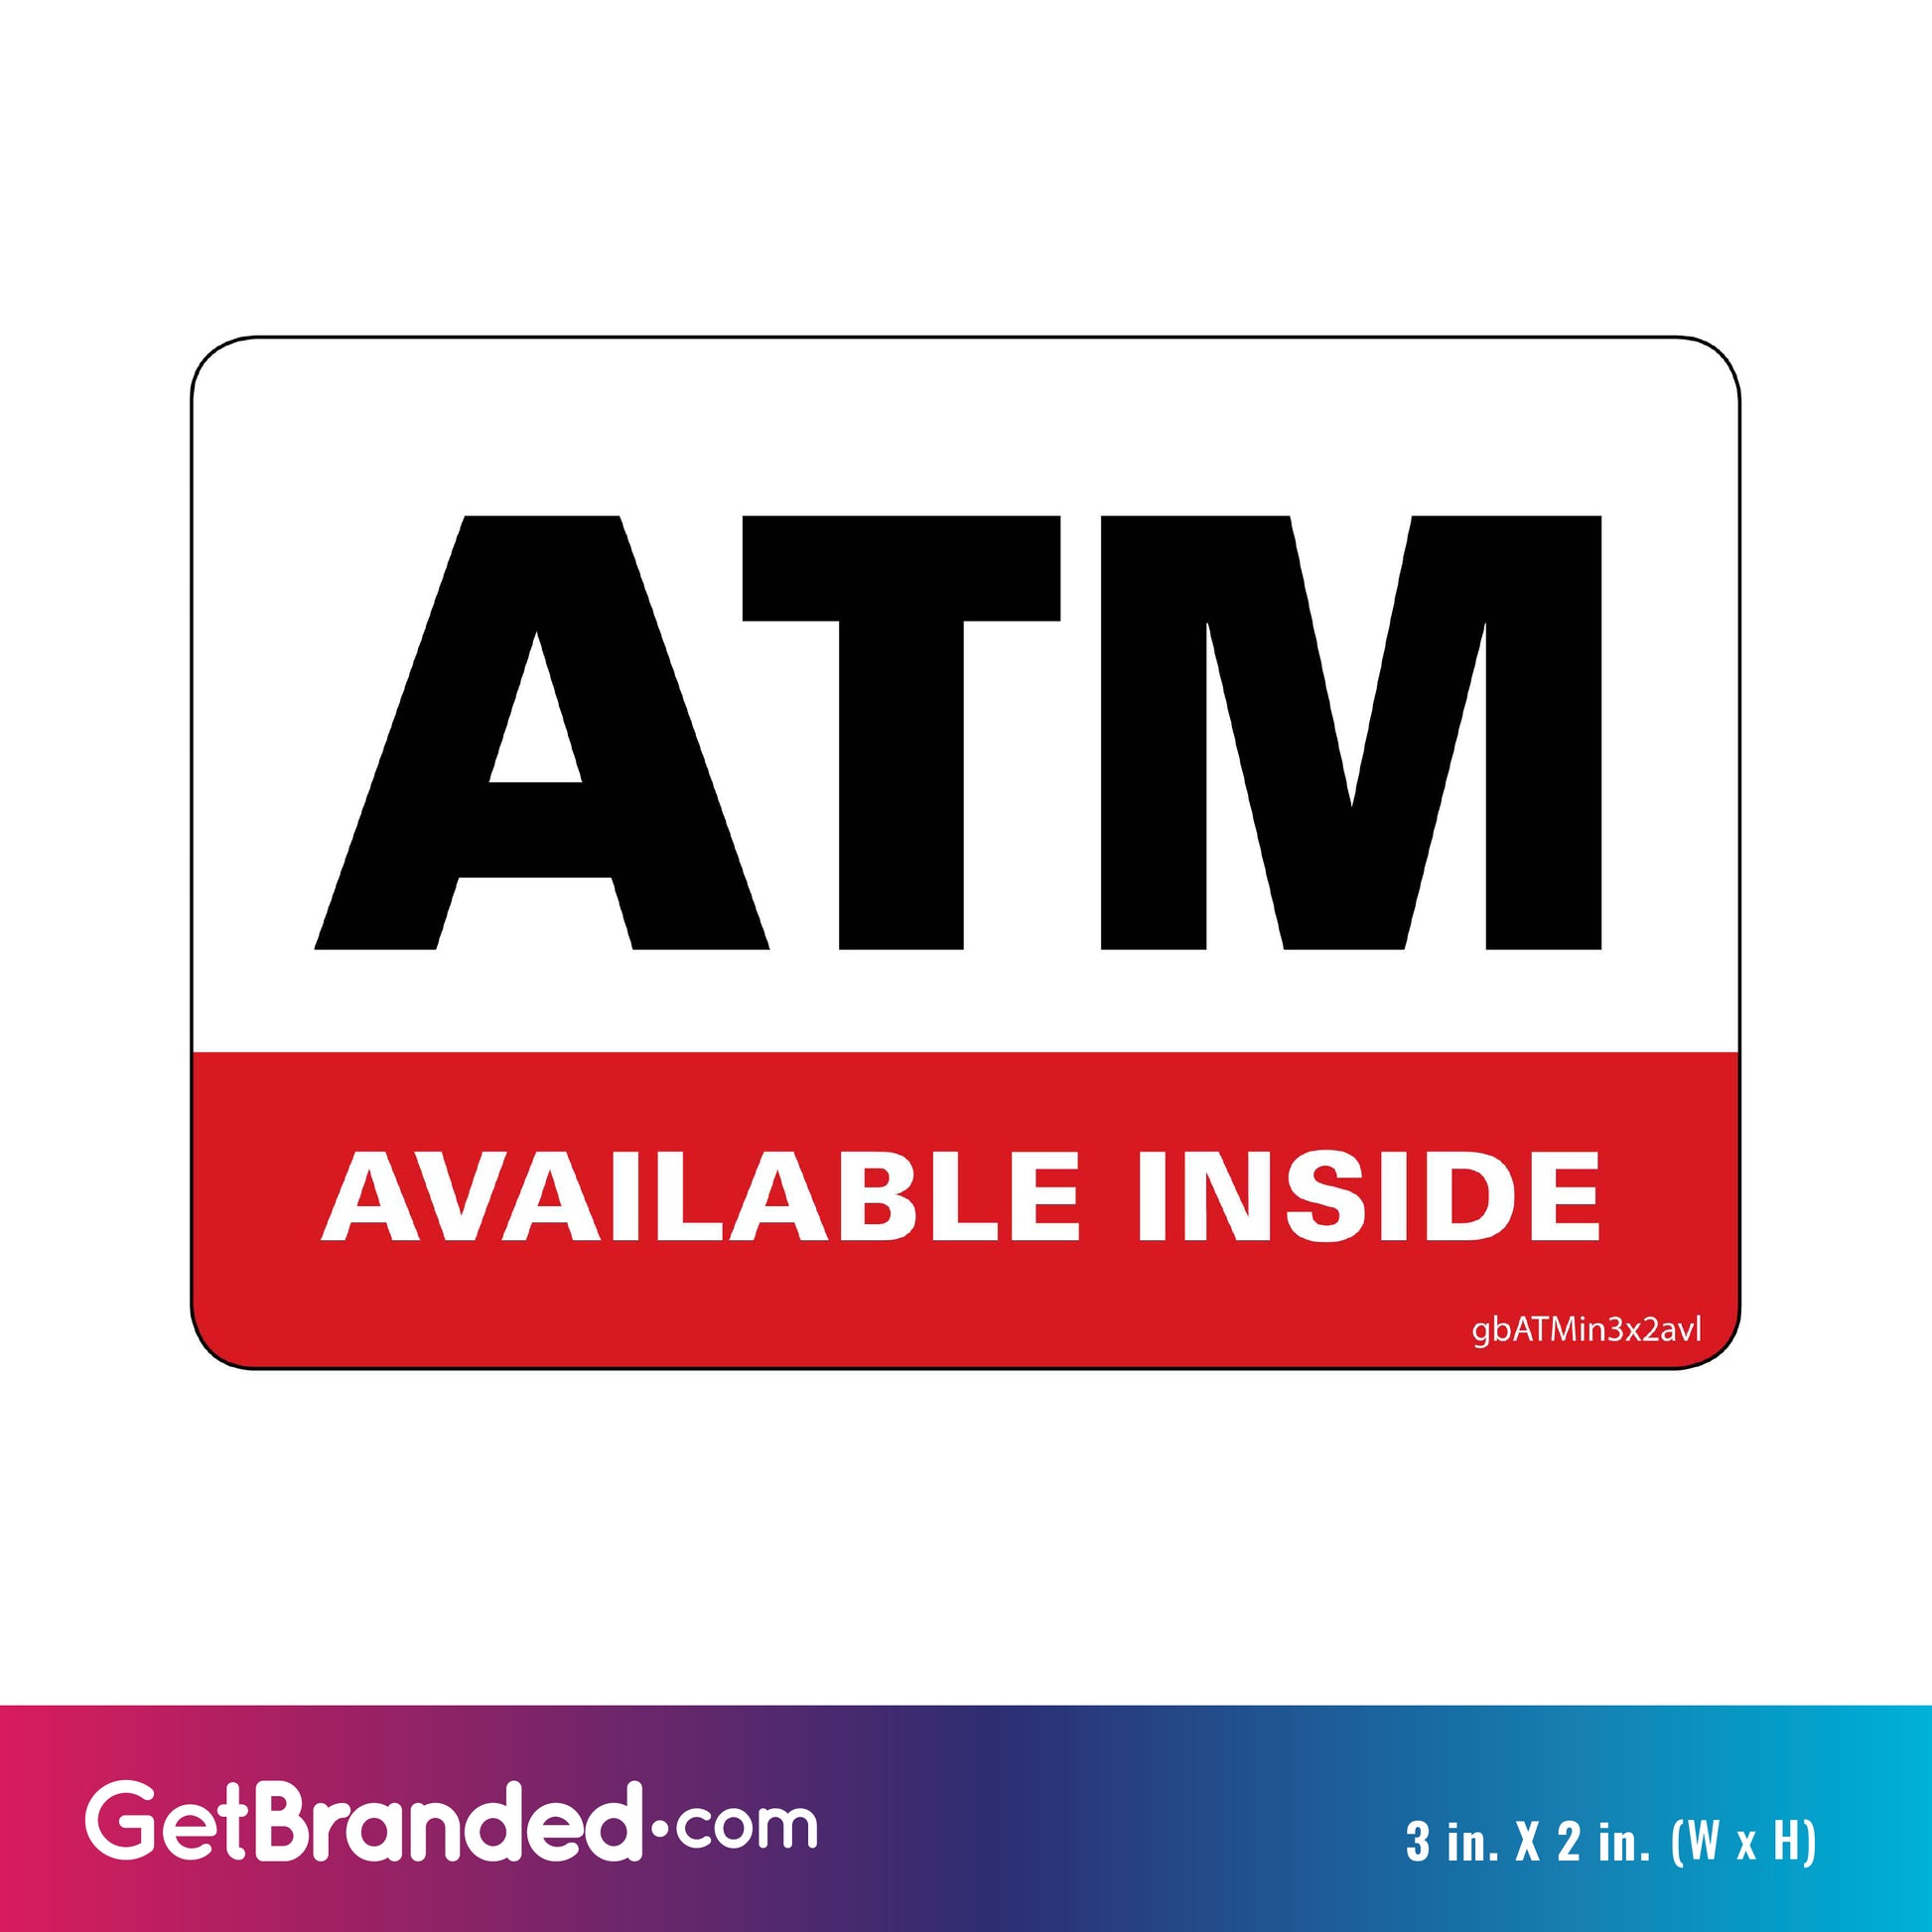 ATM Available Inside, Red and White Decal size guide. 3 inches by 2 inches in size.